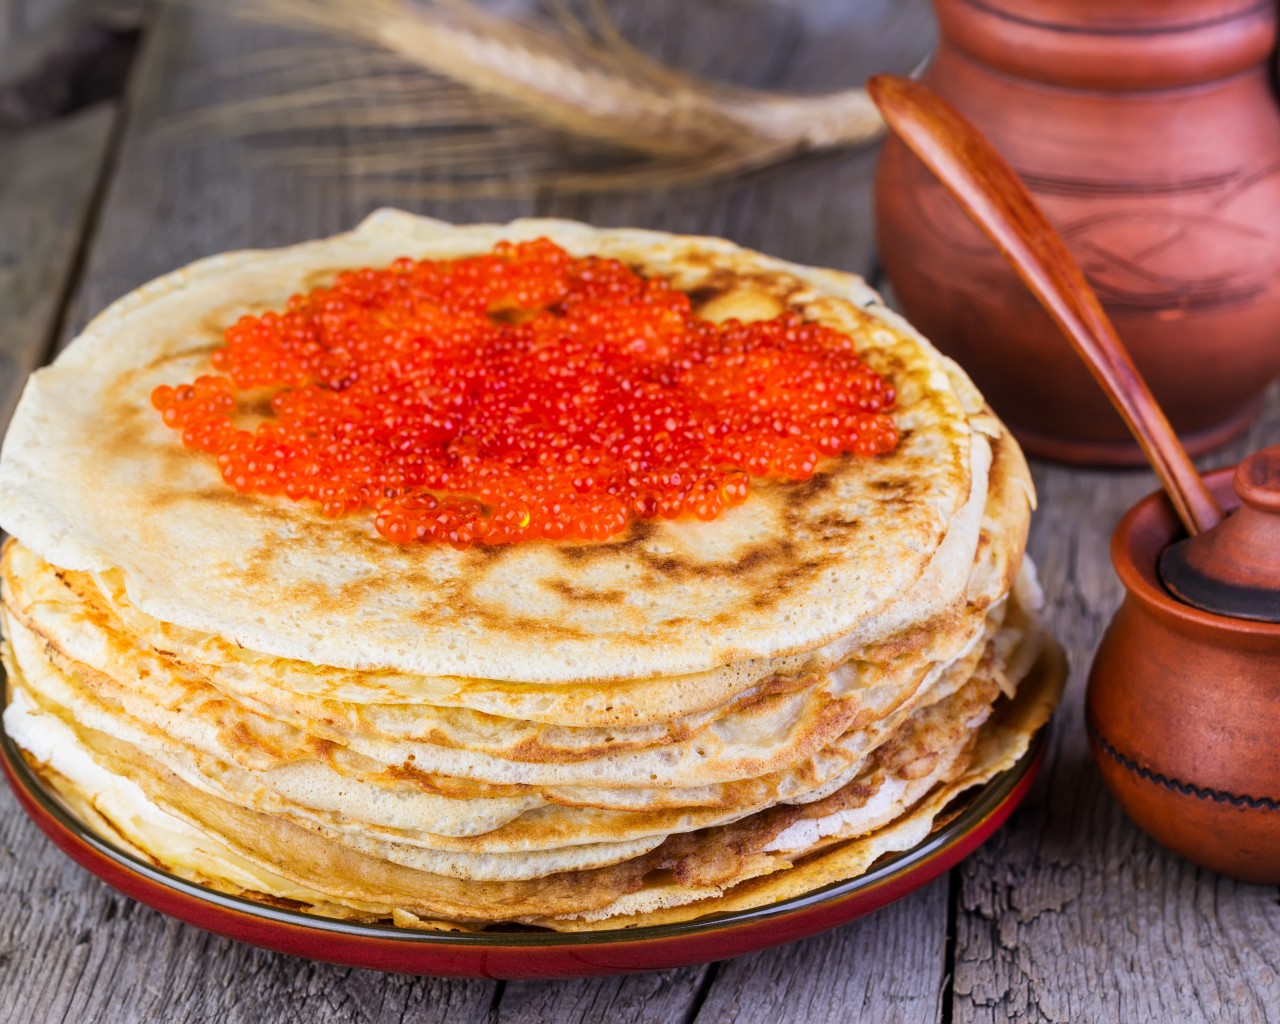 A pile of pancakes with red caviar on a wooden table, a treat for Shrovetide